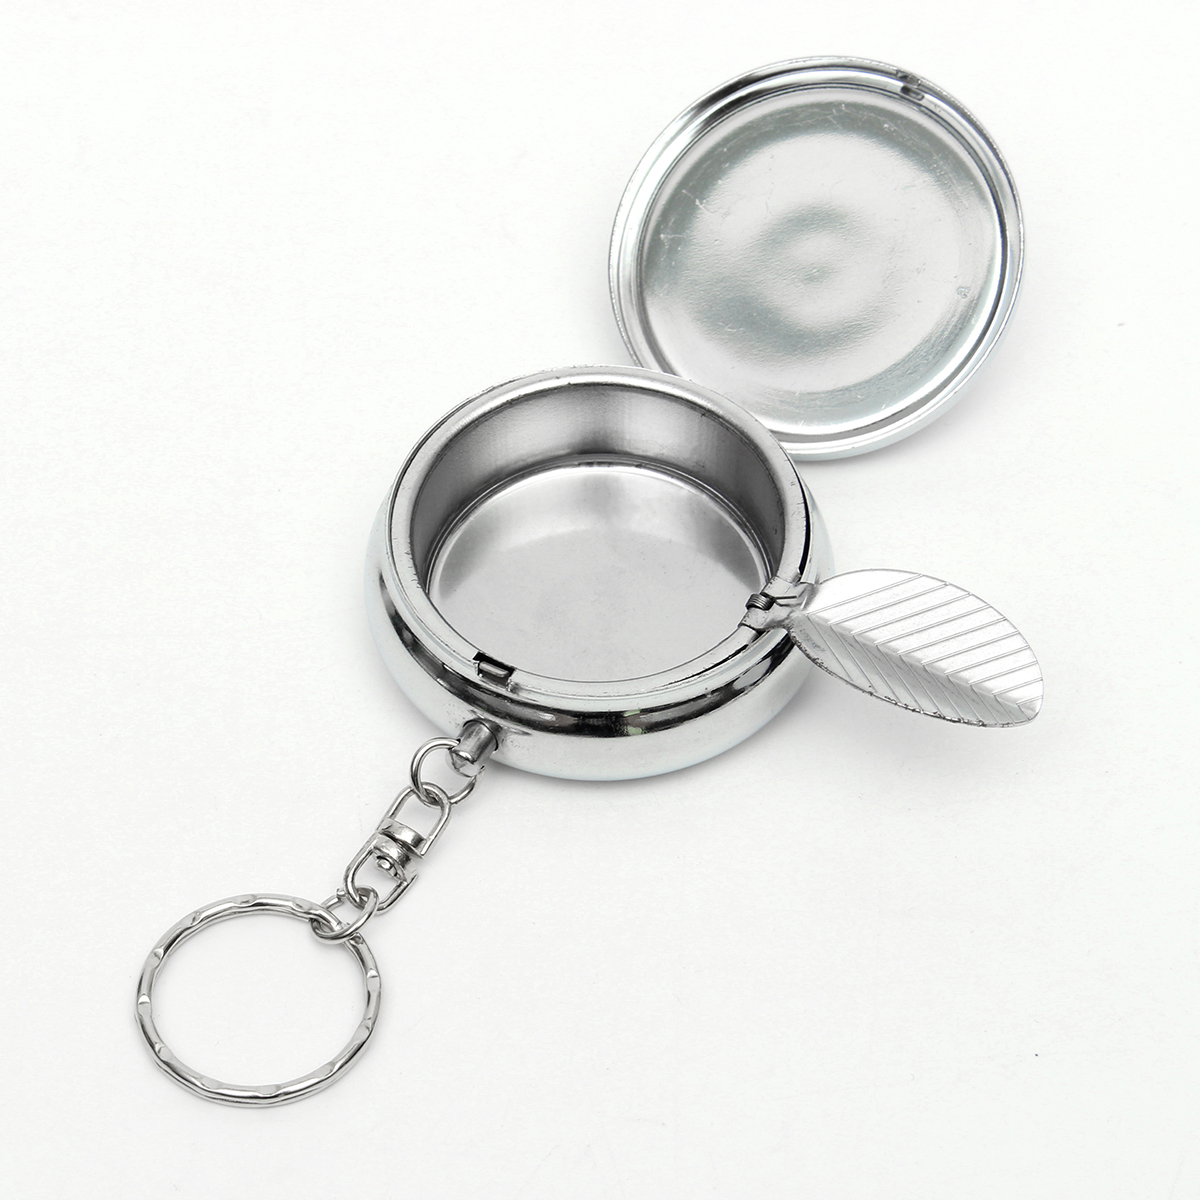 Portable-Stainless-Steel-Round-Ashtray-Jewelry-Box-Storage-Case-With-Keychain-1385803